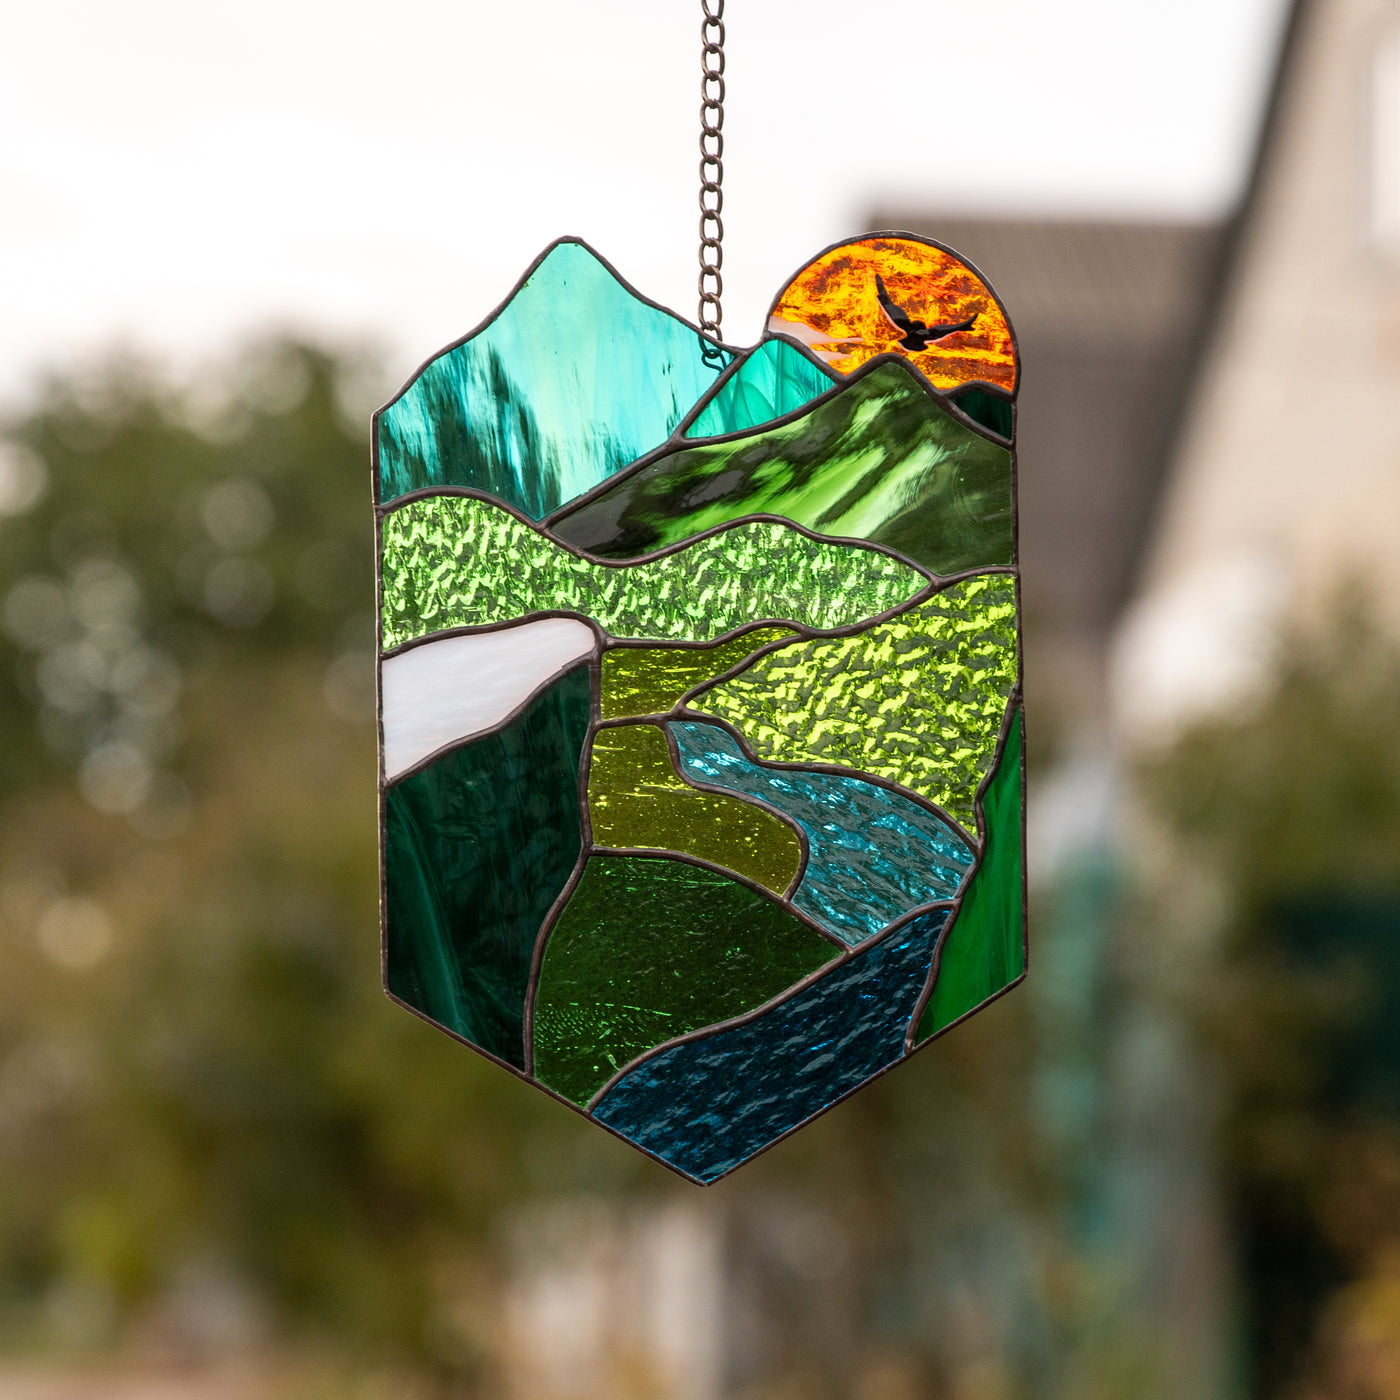 Landscape panel of stained glass for window decor